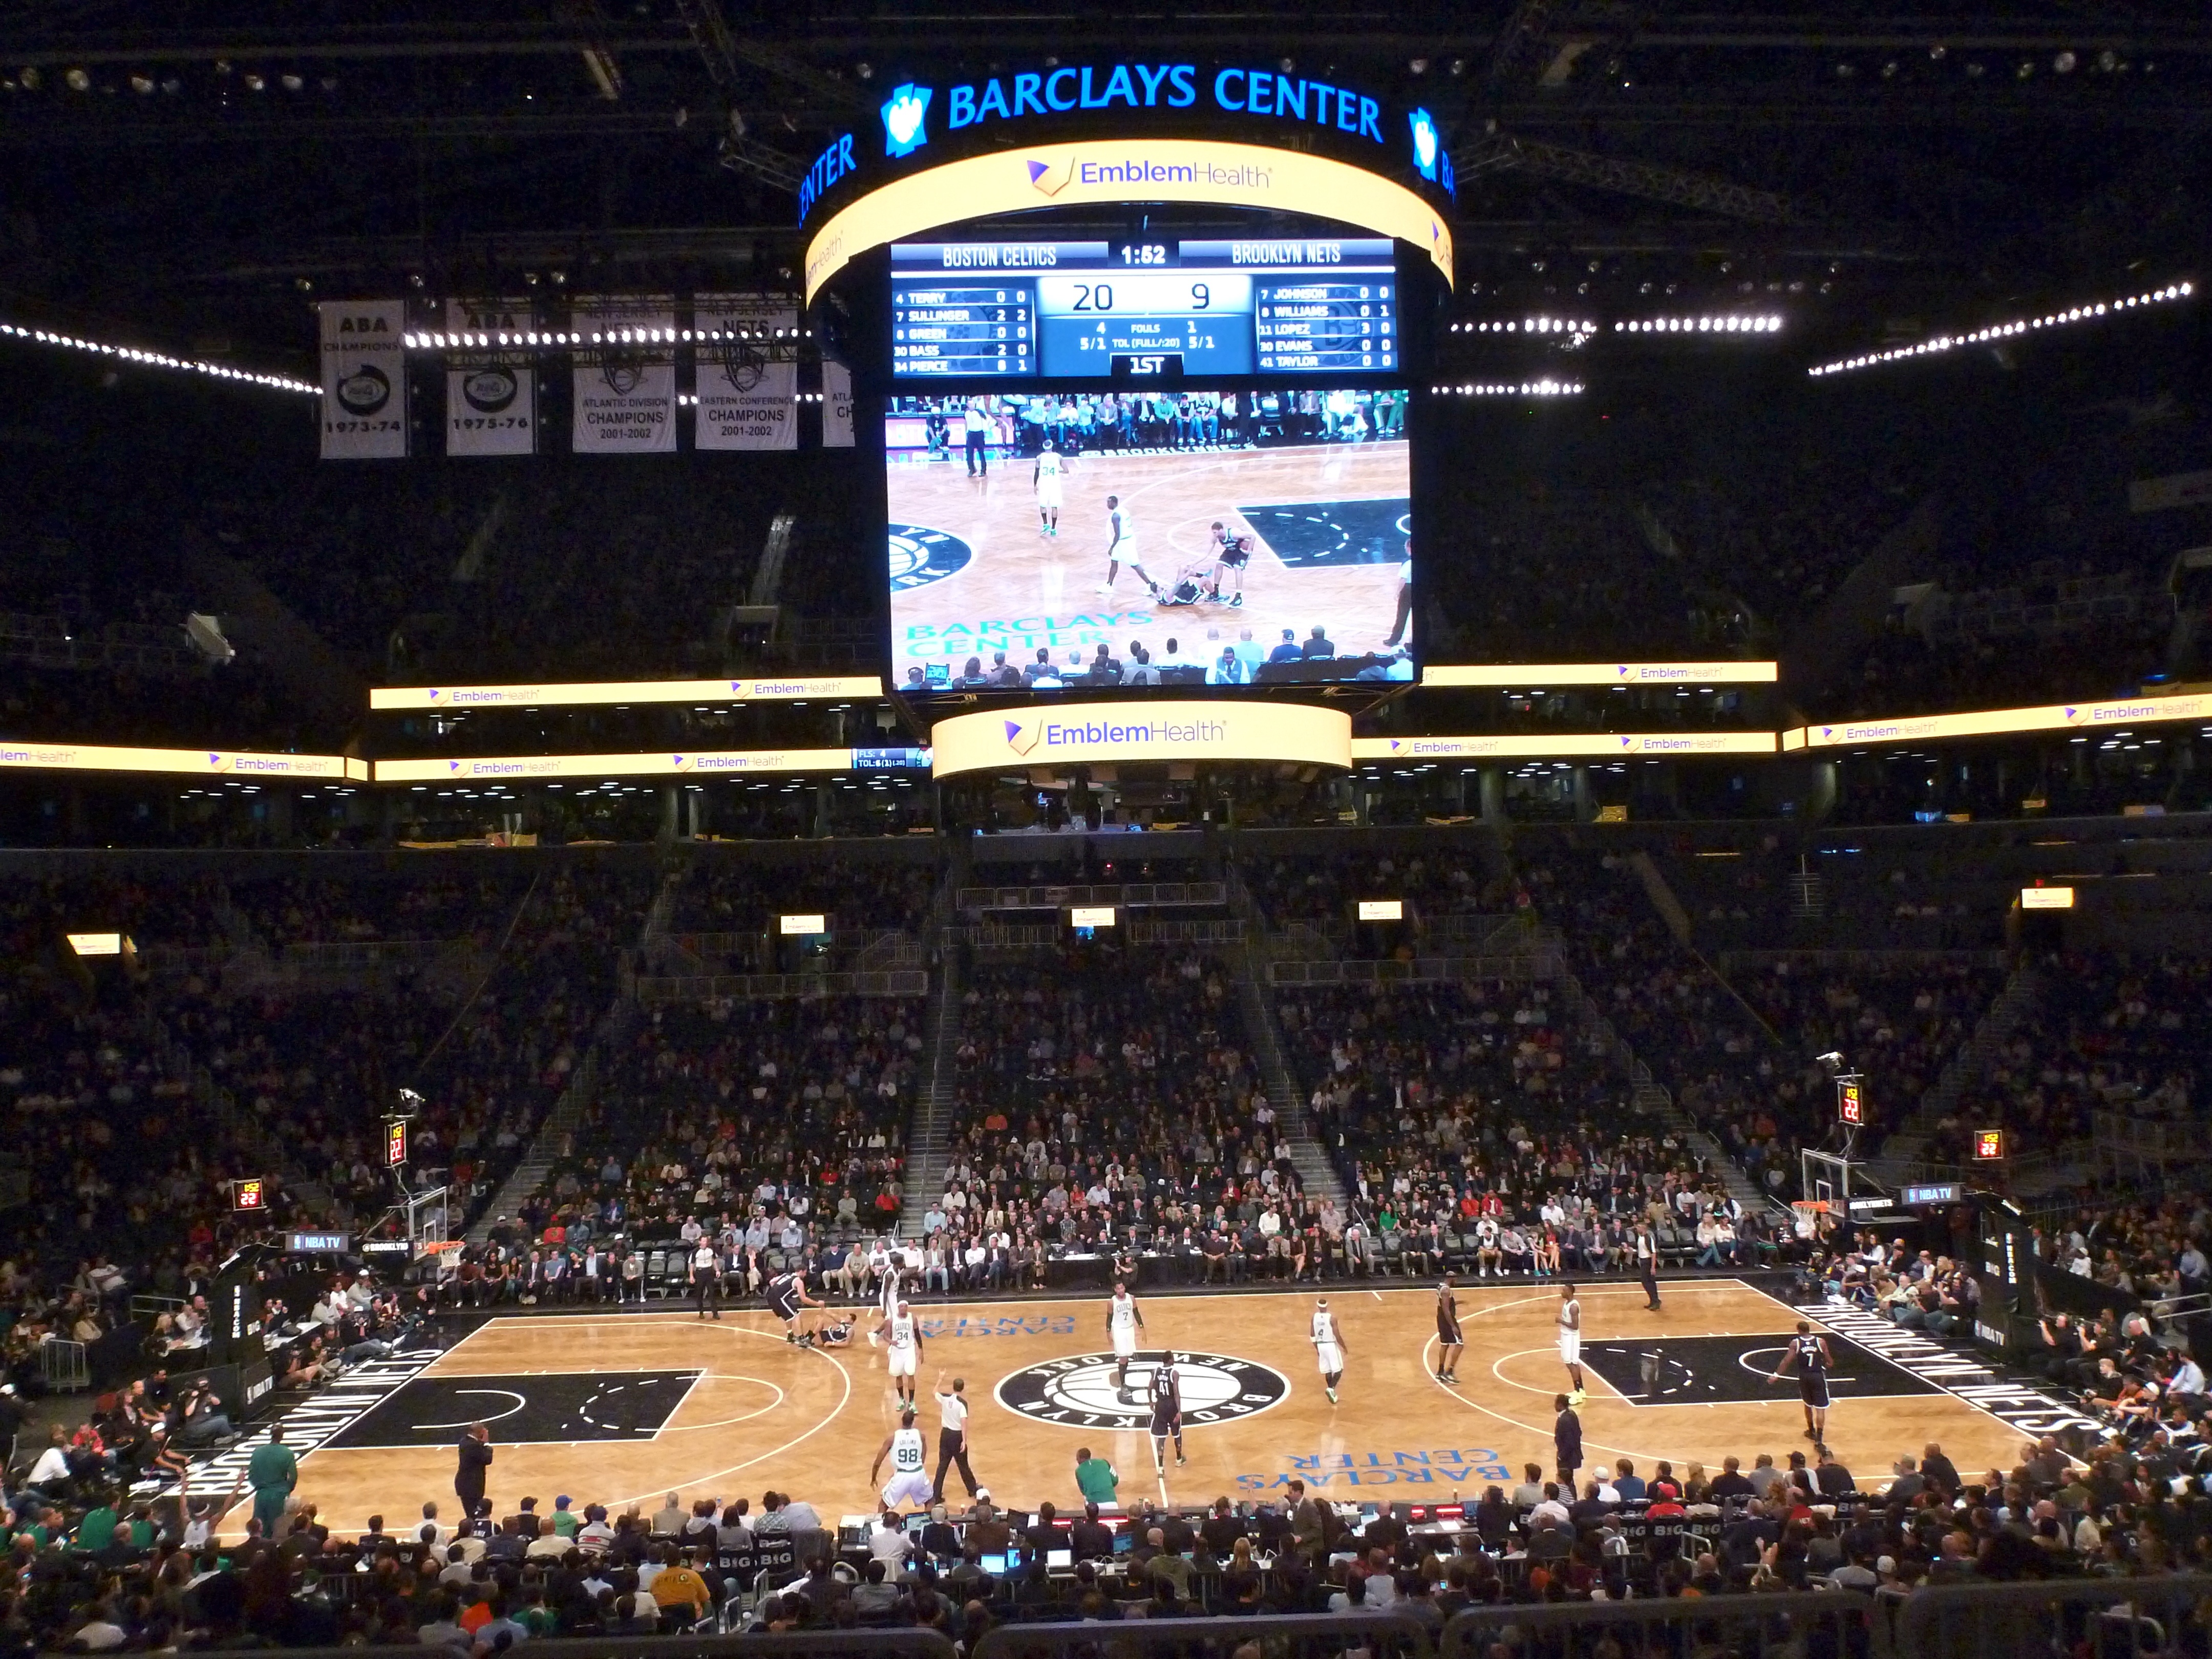 Brooklyn Nets Limousine Service to Barclays Center4320 x 3240